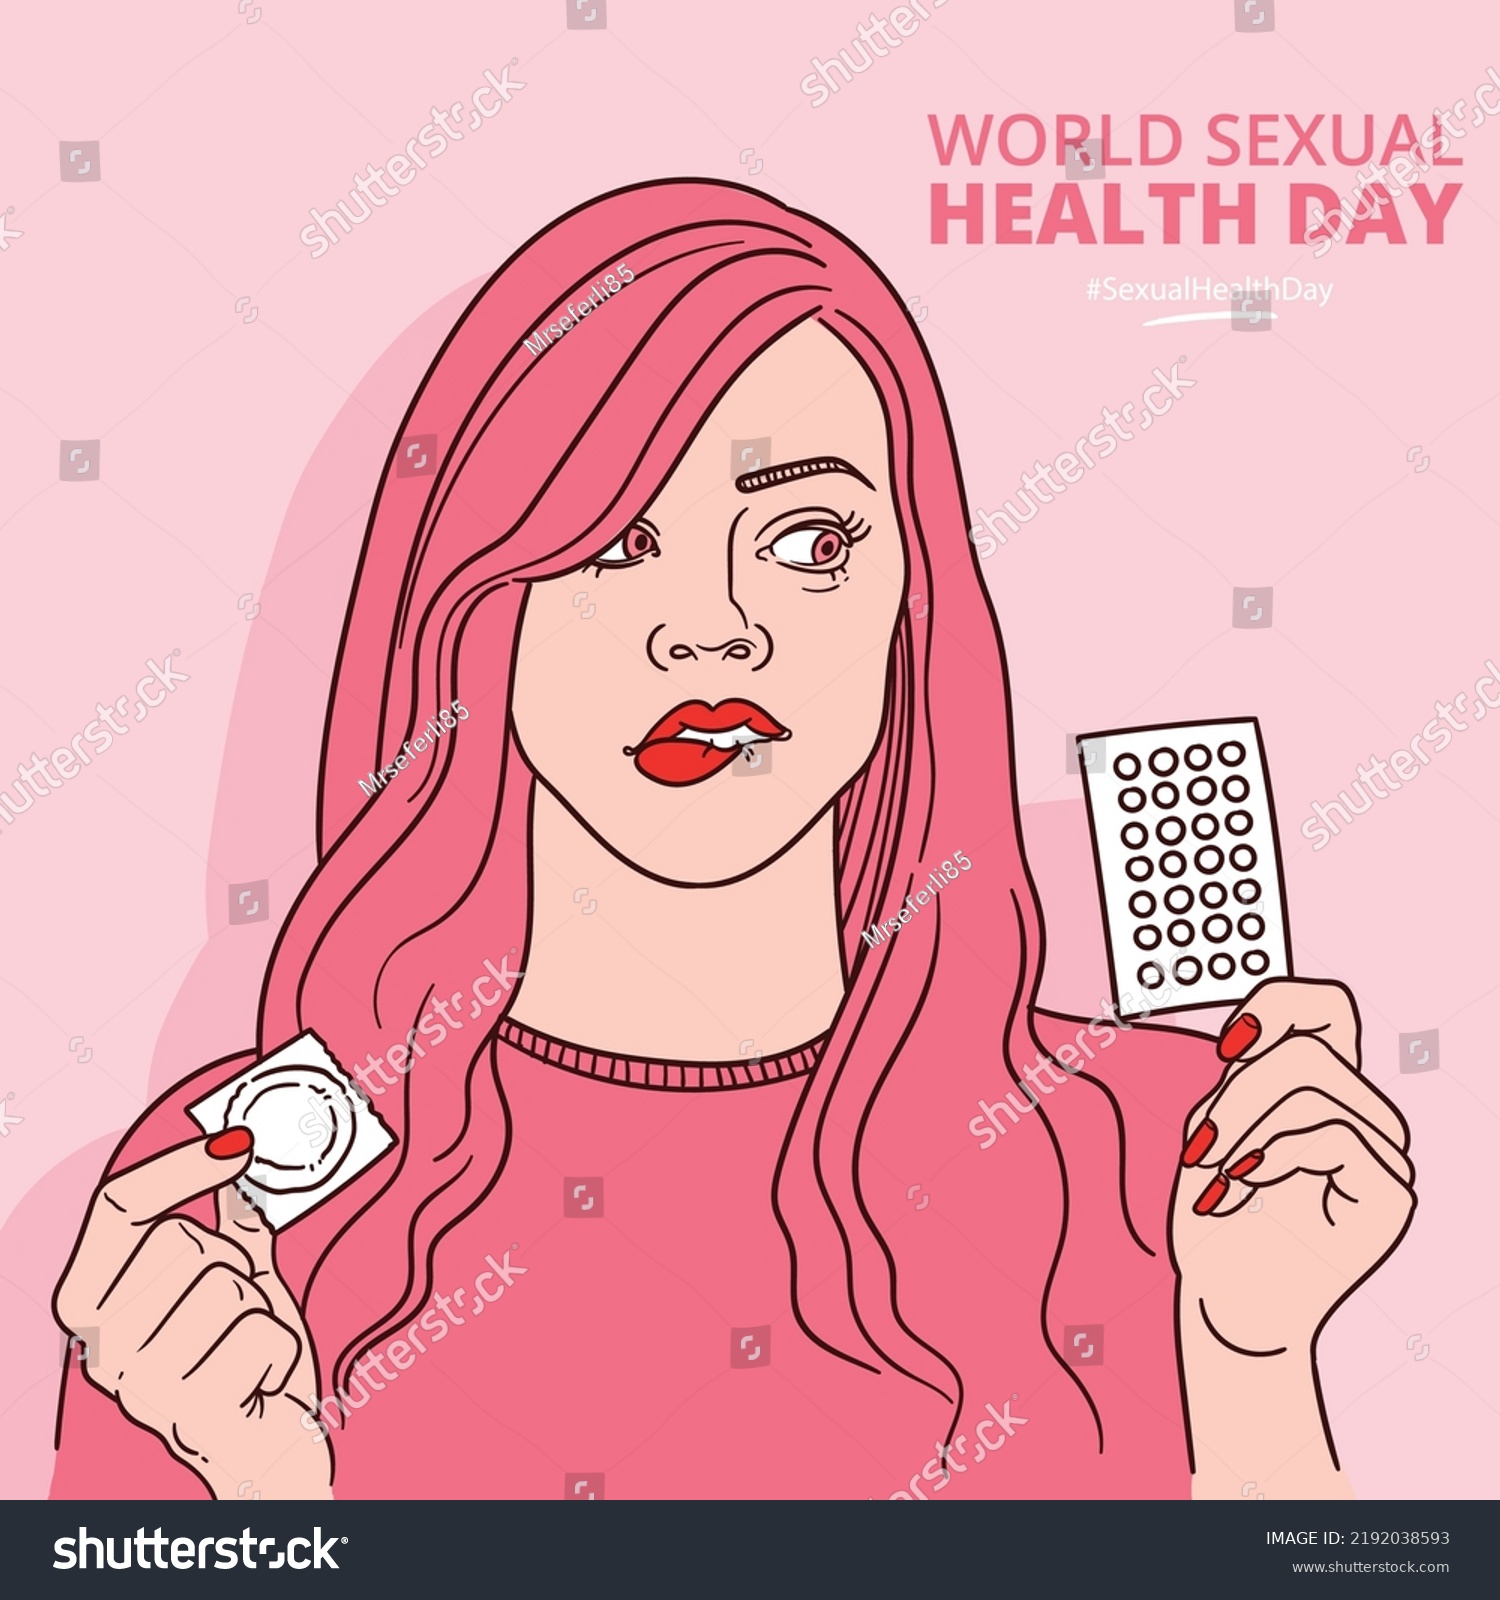 World Sexual Health Day Greeting Card Stock Vector Royalty Free 2192038593 Shutterstock 